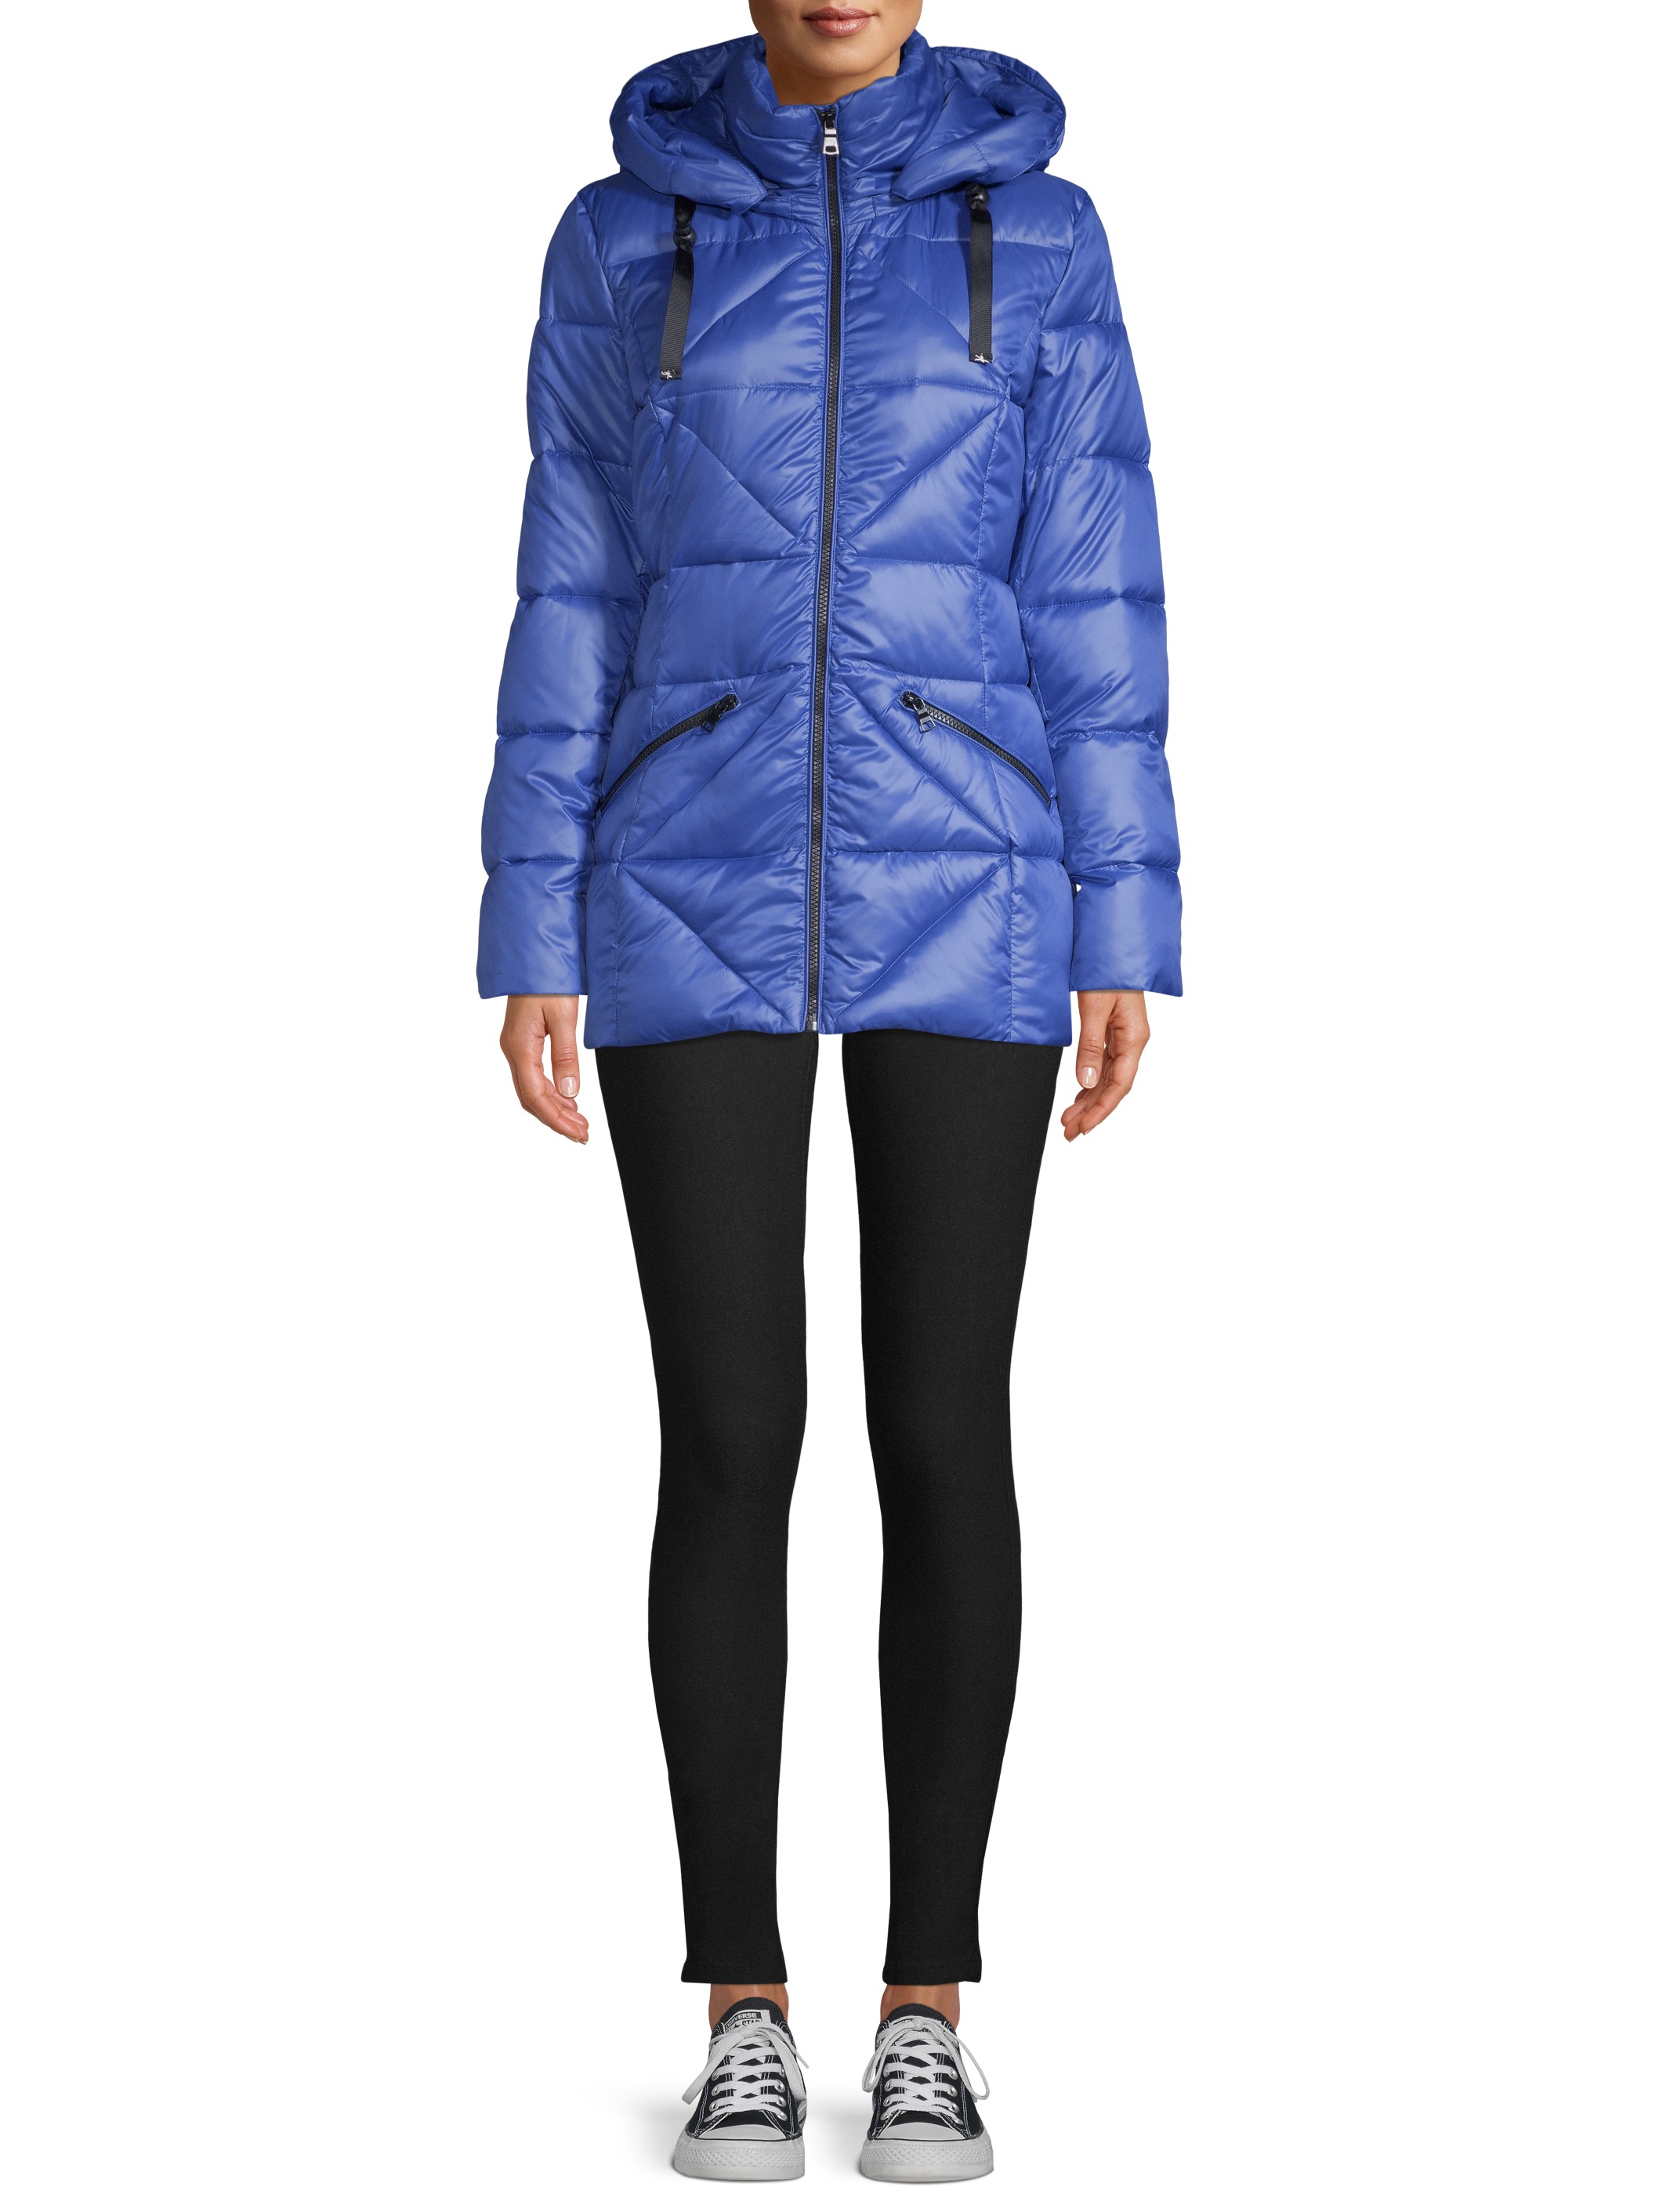 Kendall + Kylie Women's Shiny Long Puffer with Bold Zipper Detail - image 2 of 6